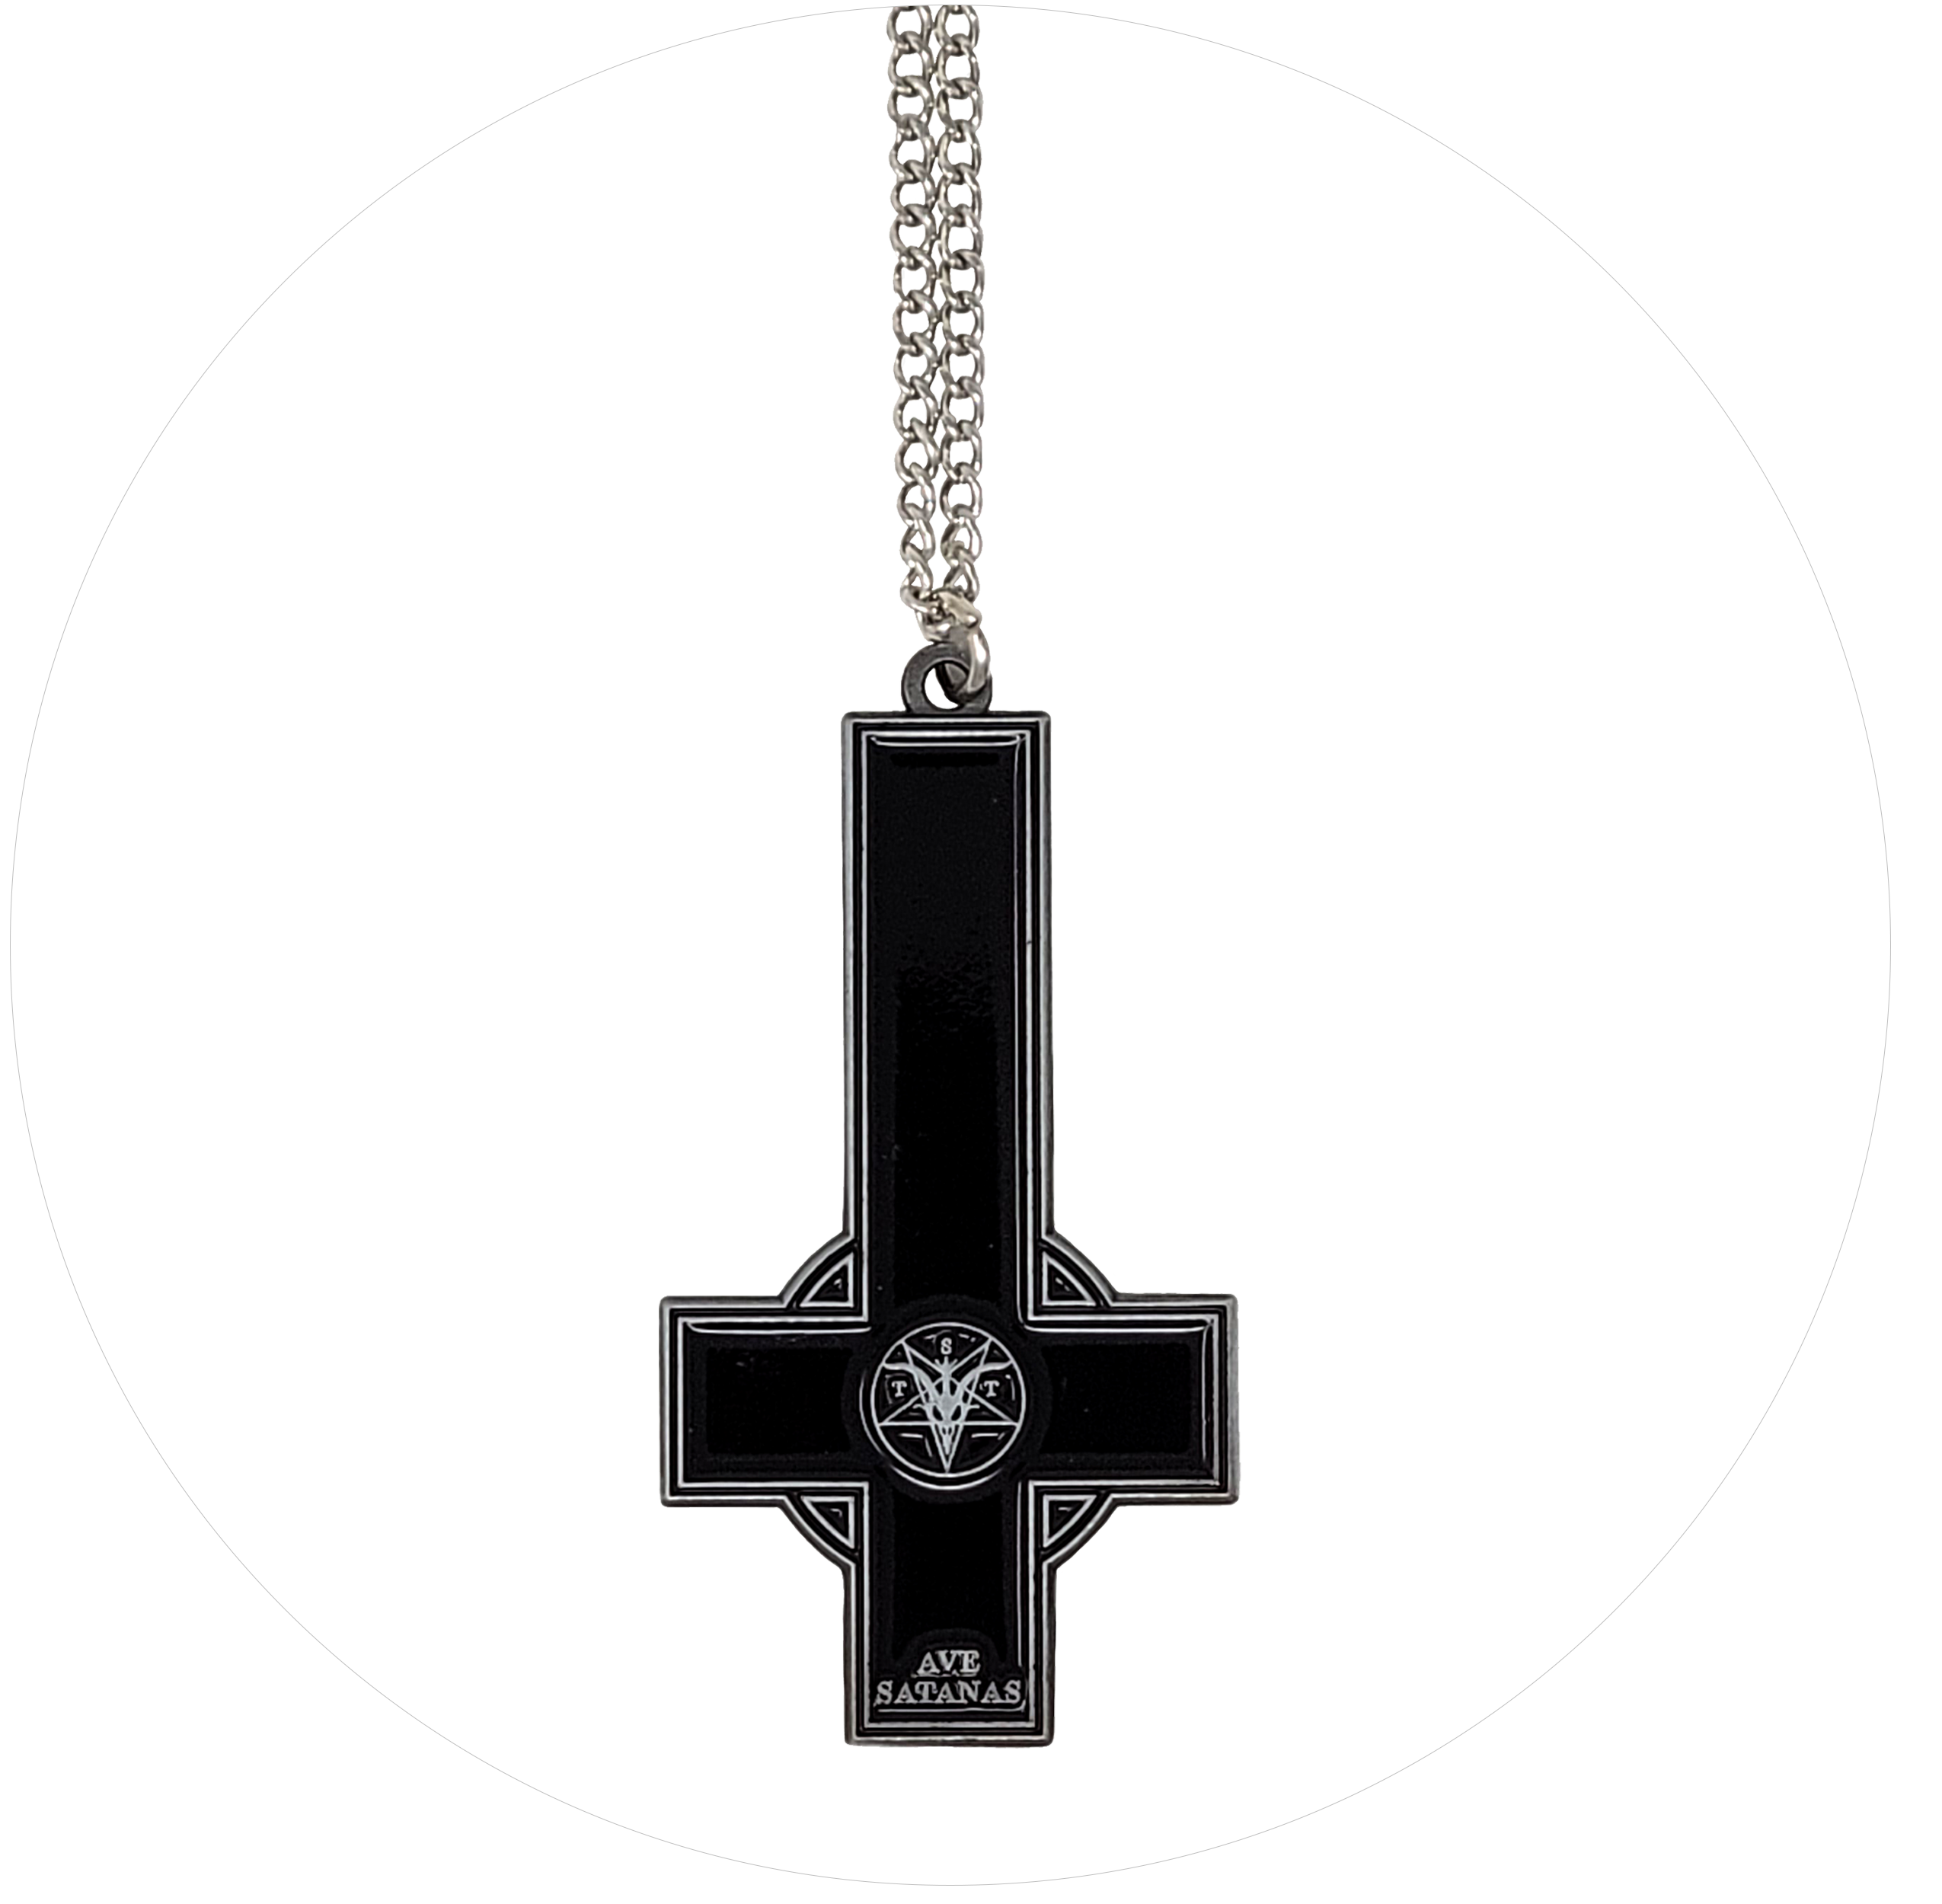 The Satanic Temple Jewelry. Silver pendant with purple and black text logo.